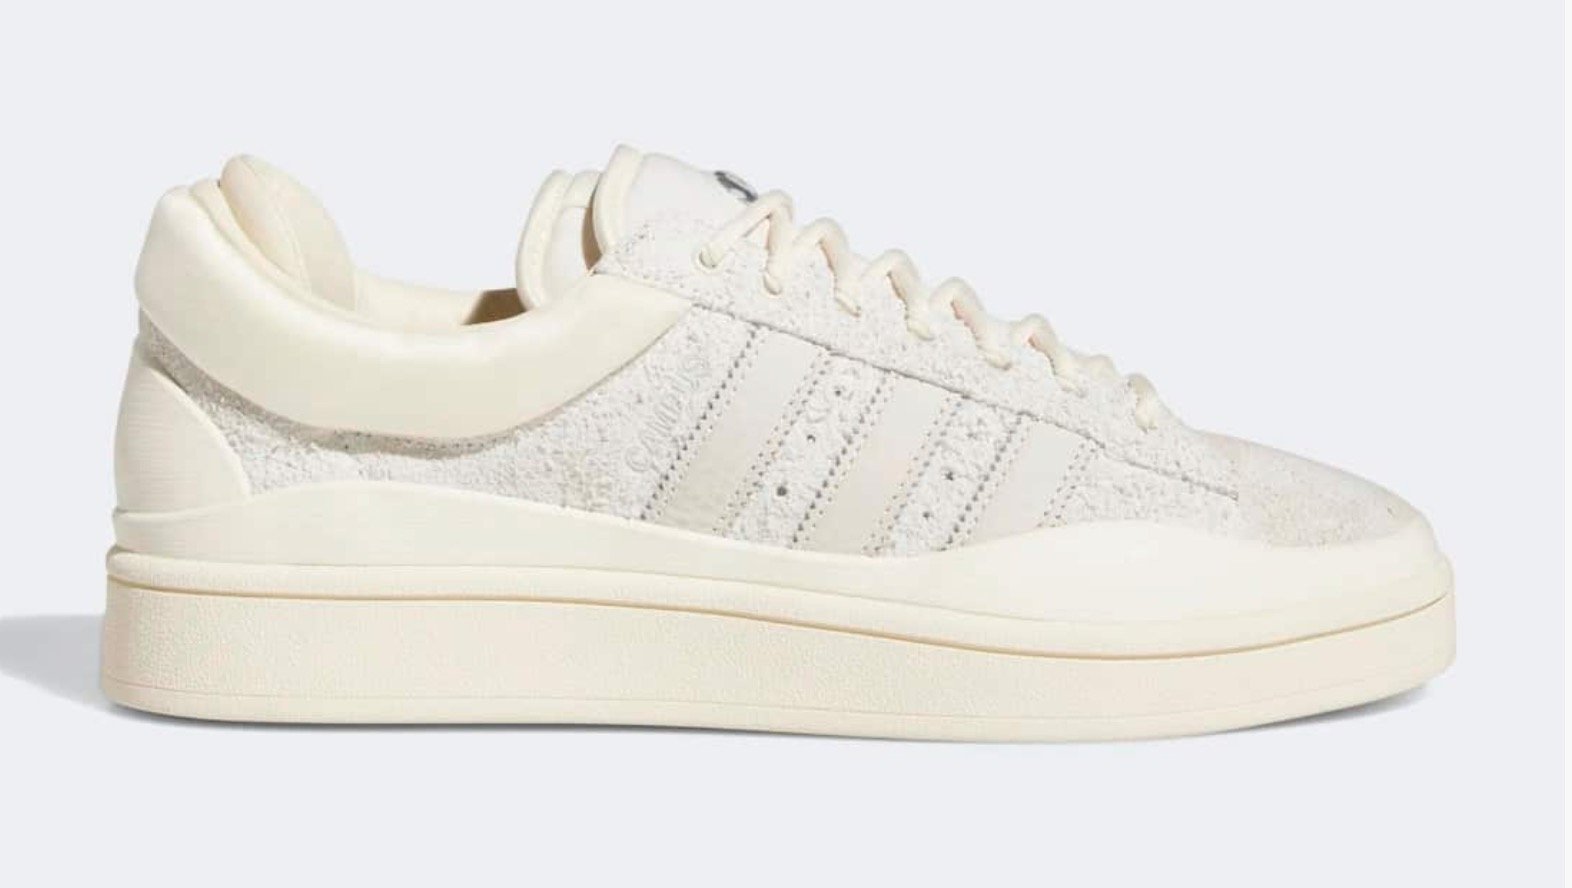 Bad Bunny X Adidas Campus Cloud White sneakers